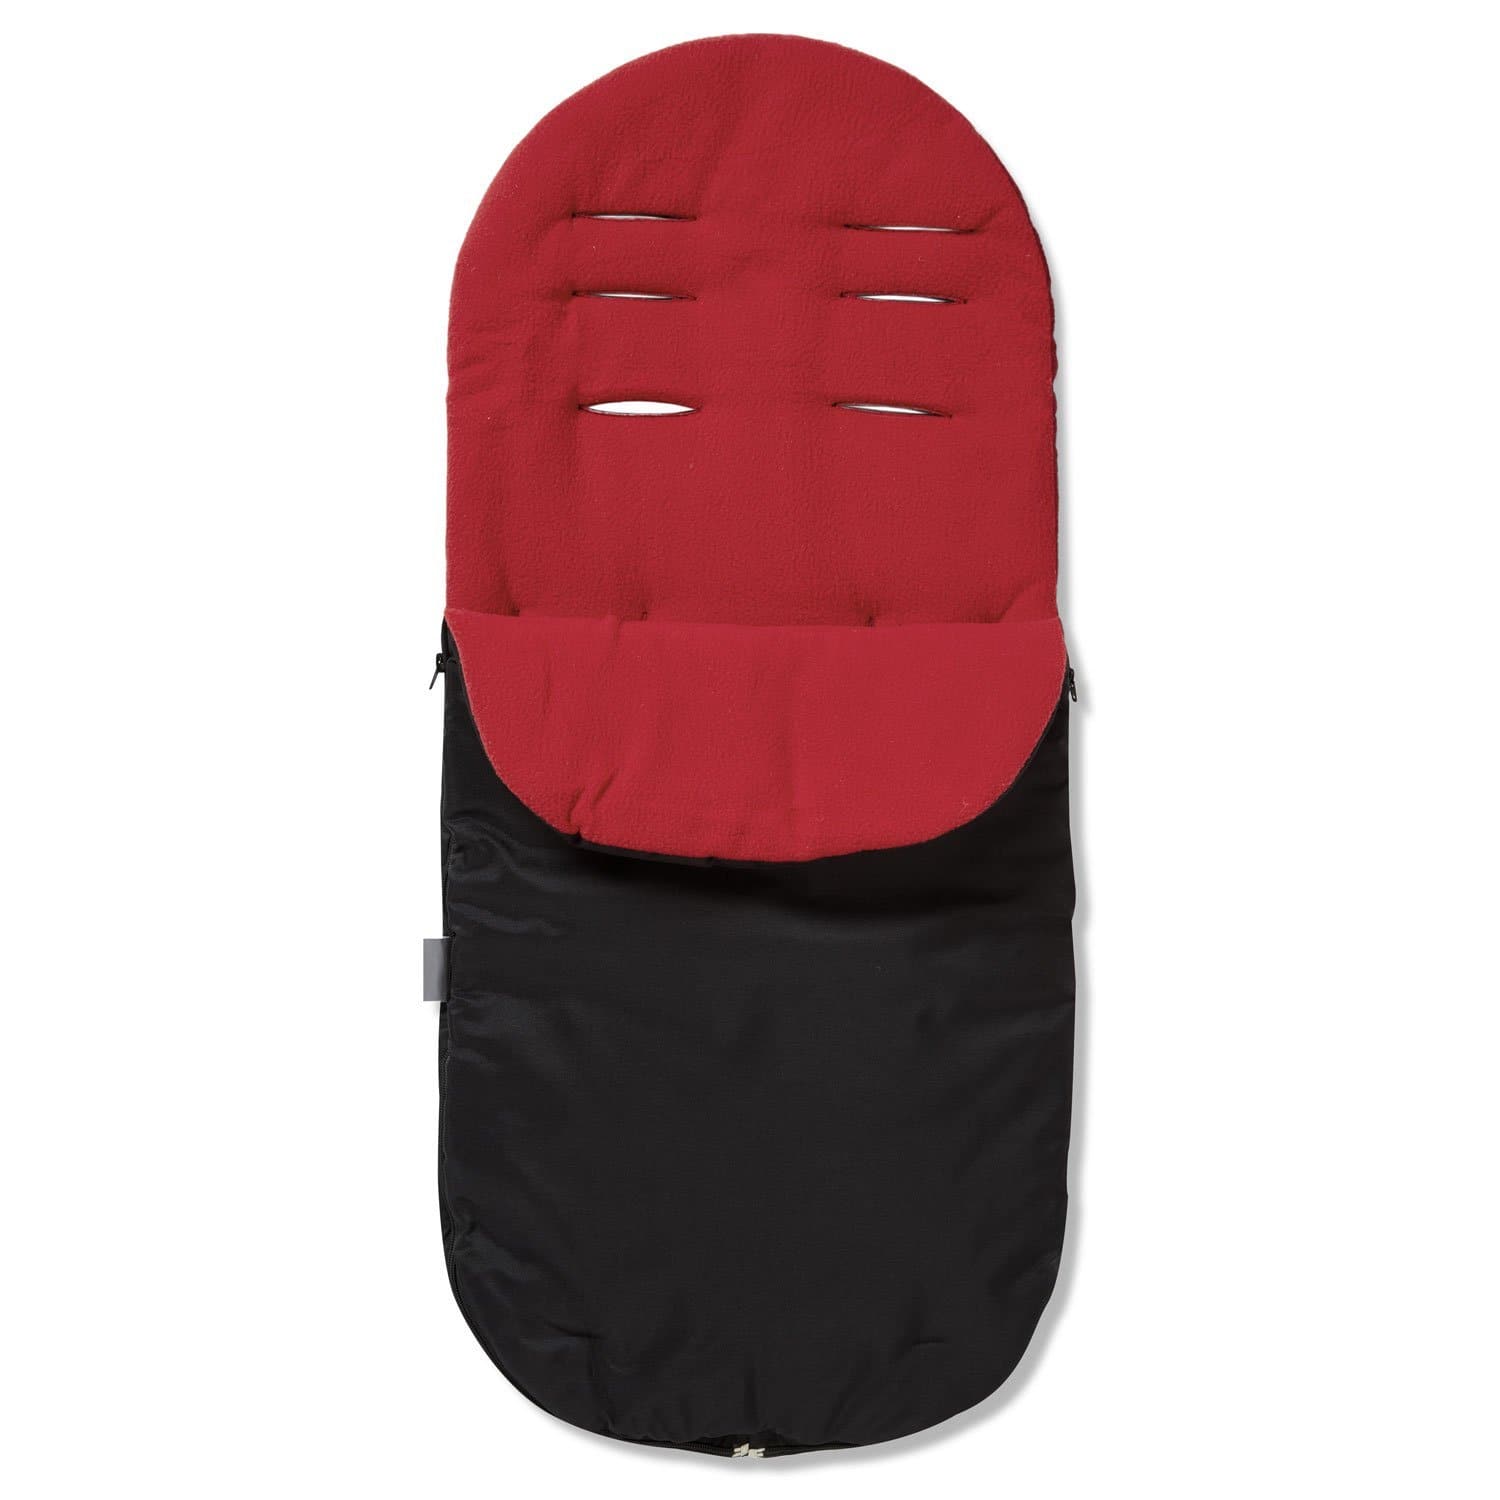 Footmuff / Cosy Toes Compatible with Babyzen - Red / Fits All Models | For Your Little One